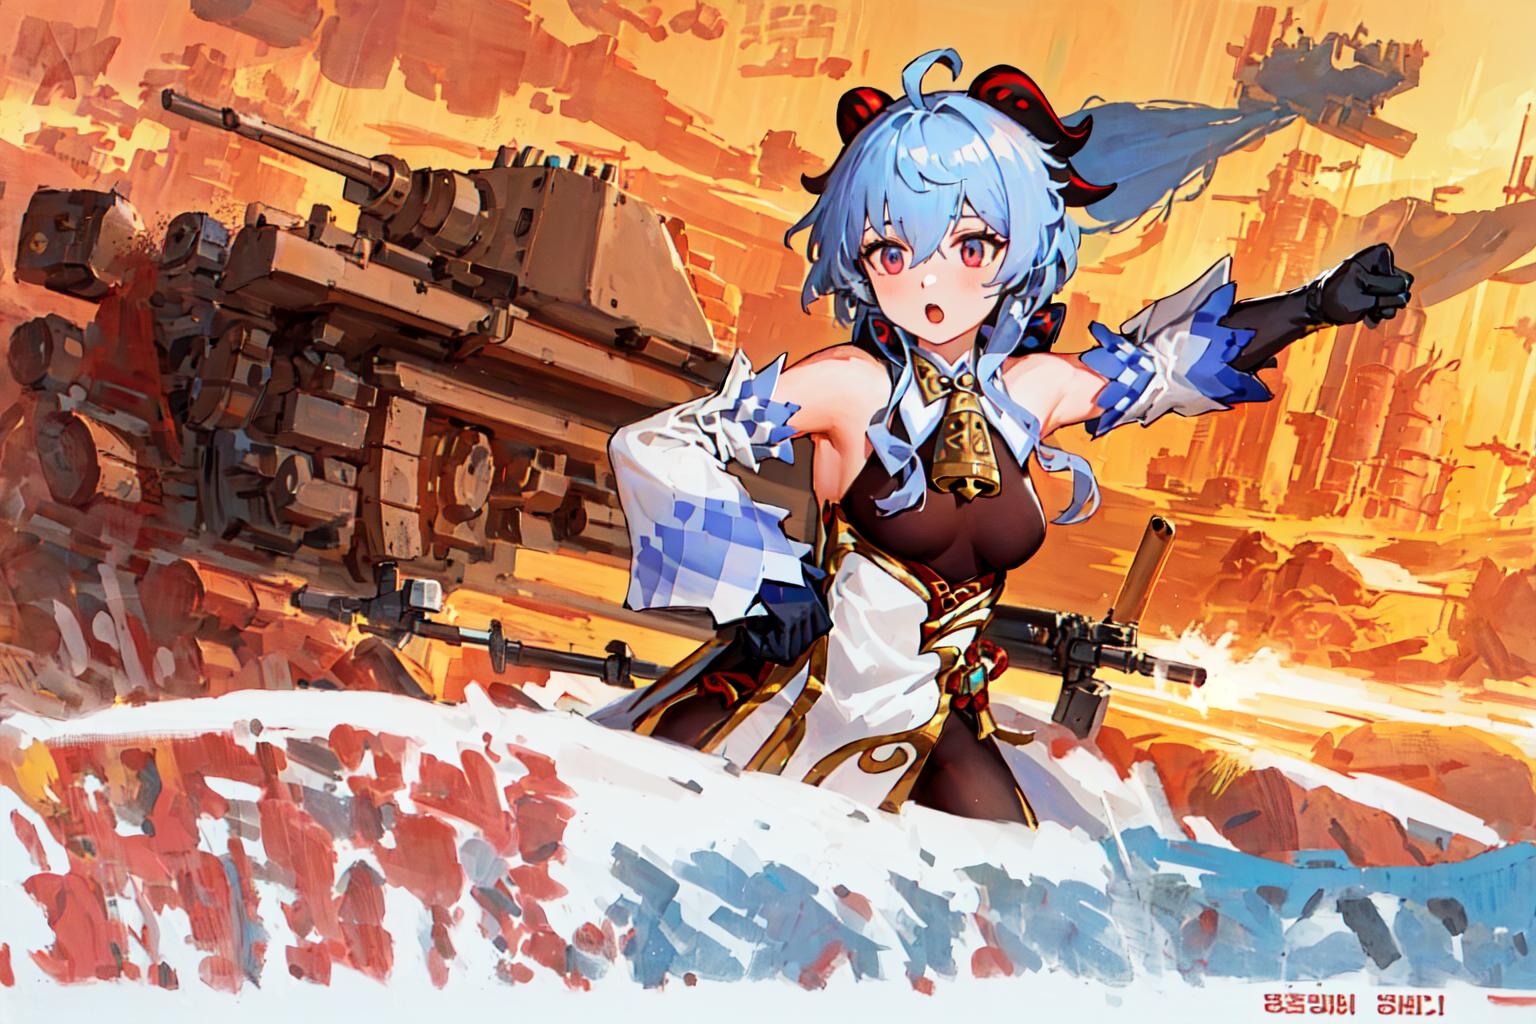 Anime Art of a Woman Holding a Gun and a Tank in the Background